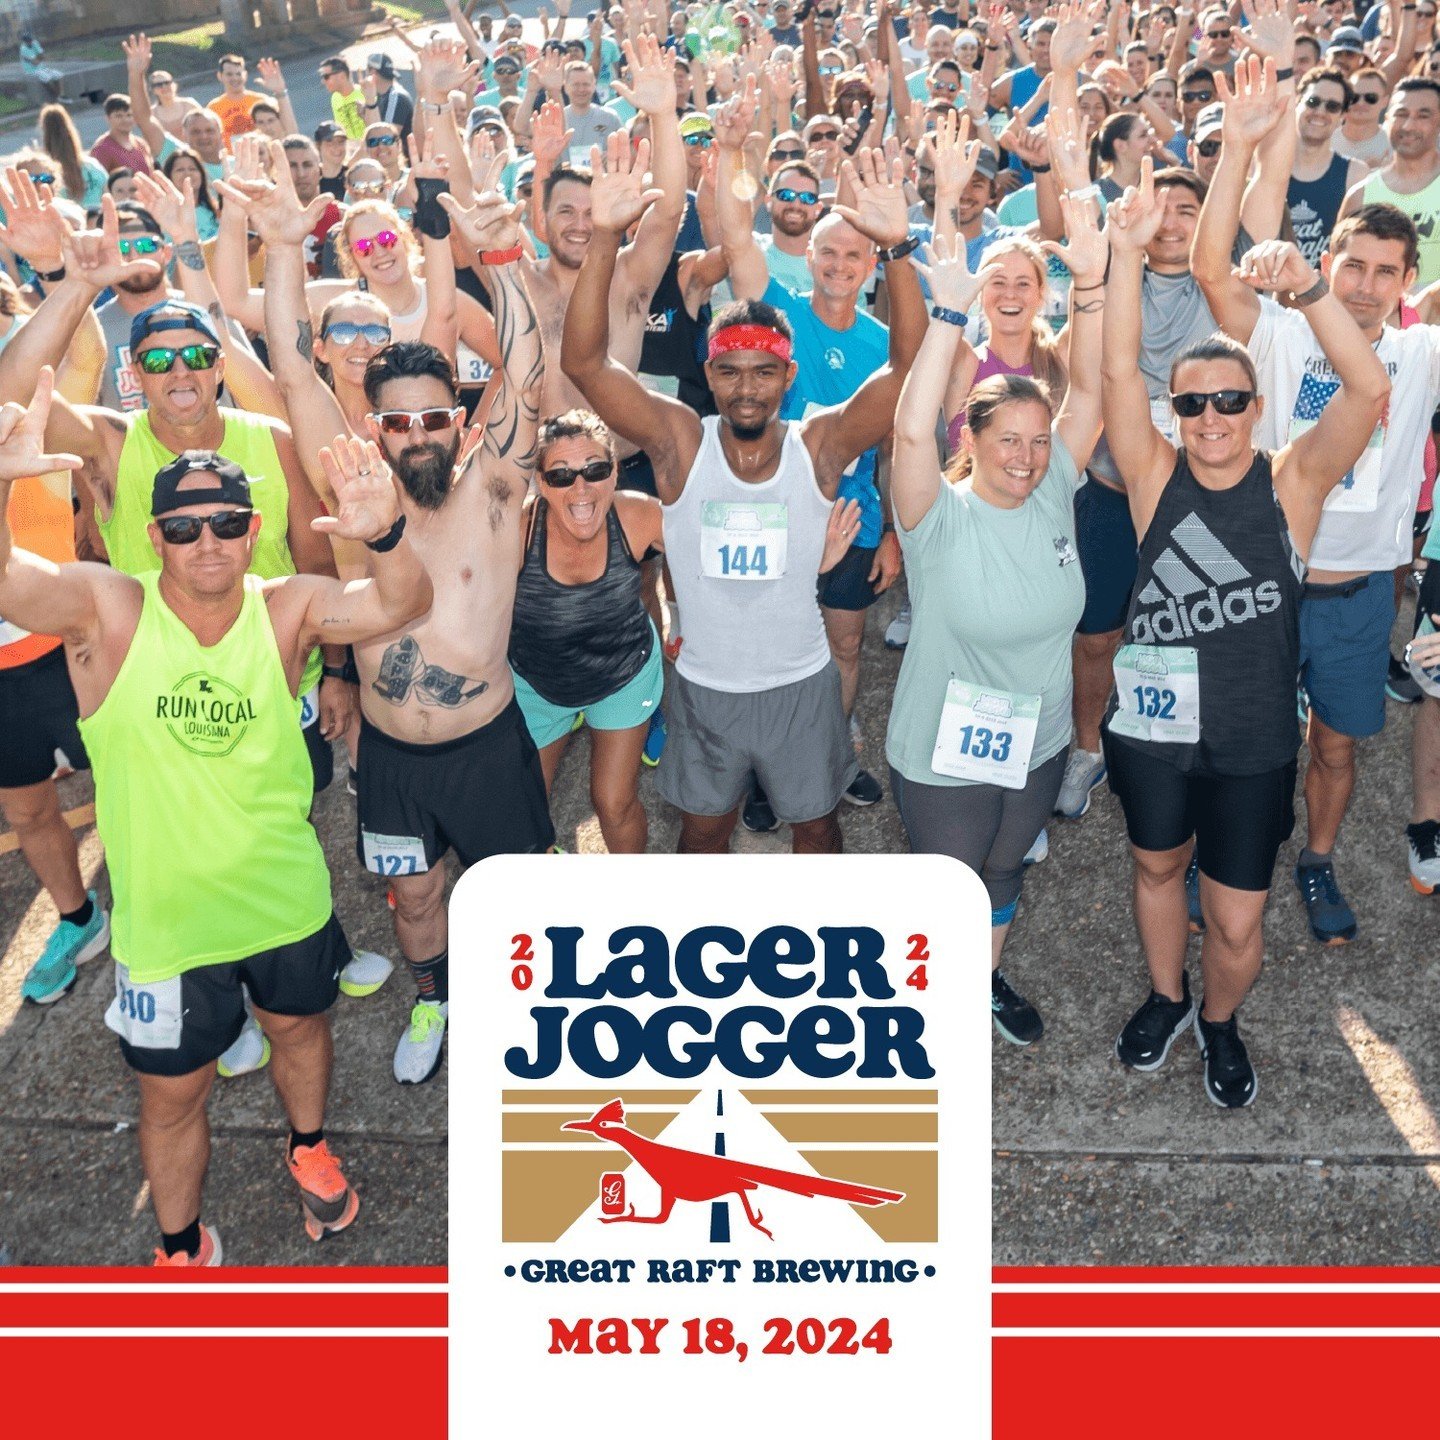 Lager Jogger early registration ends tomorrow (4/15).

Guarantee the best price on the most fun race in town. Choose from the Individual Beer Mile, Team Beer Mile Relay, and the 5K. 

Register at link in bio.